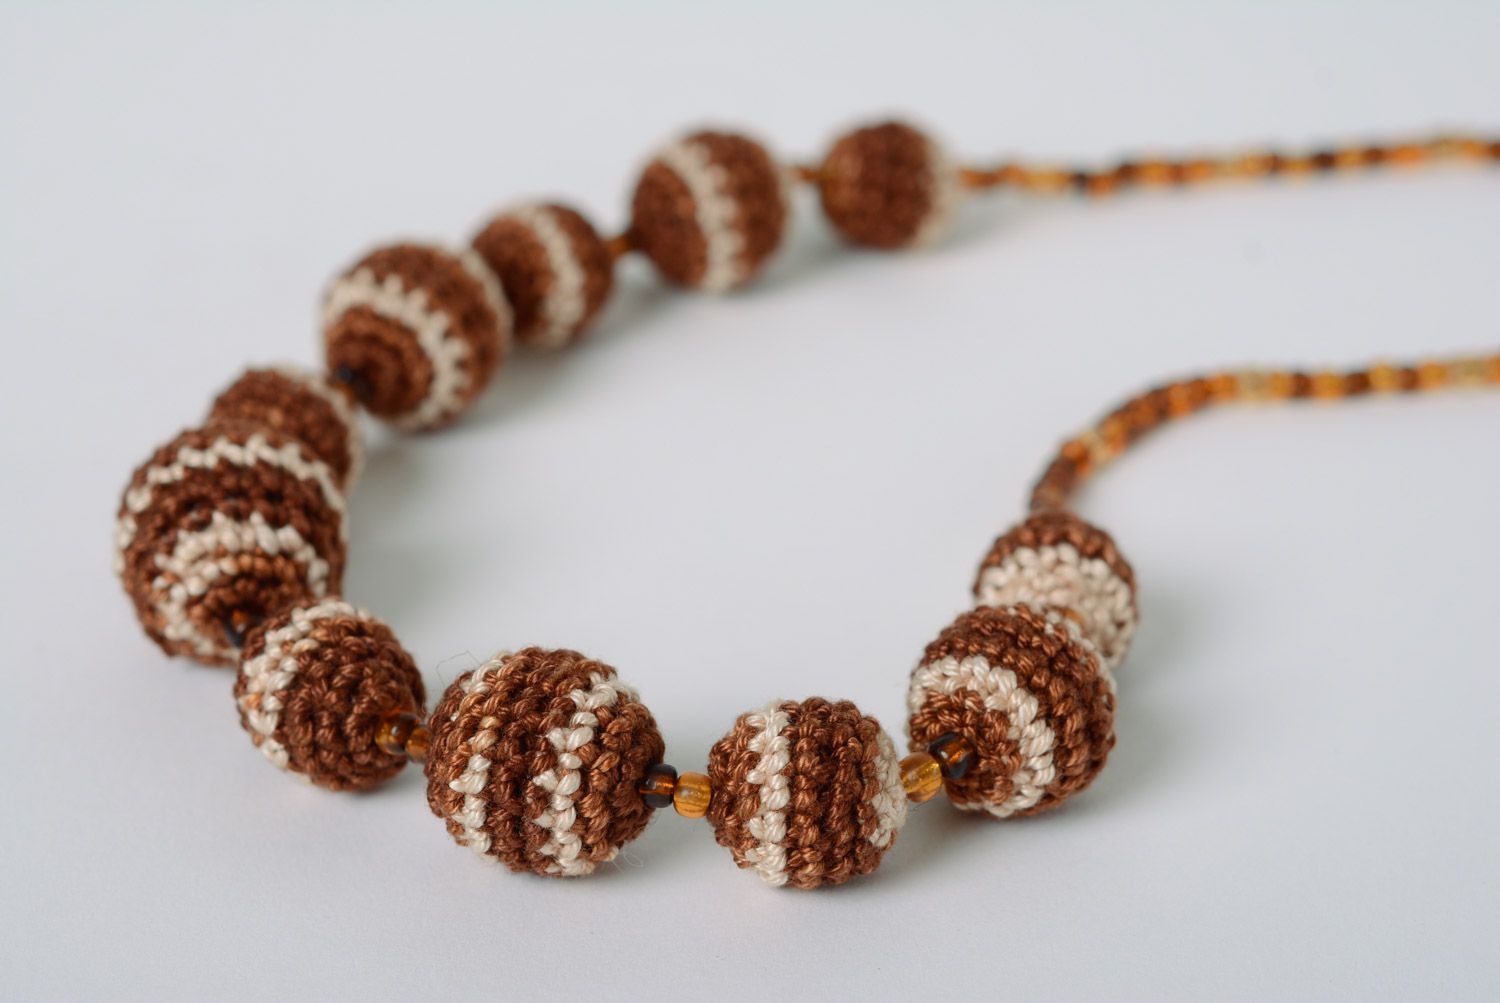 Handmade teething bead necklace crocheted of cotton threads of chocolate color photo 5